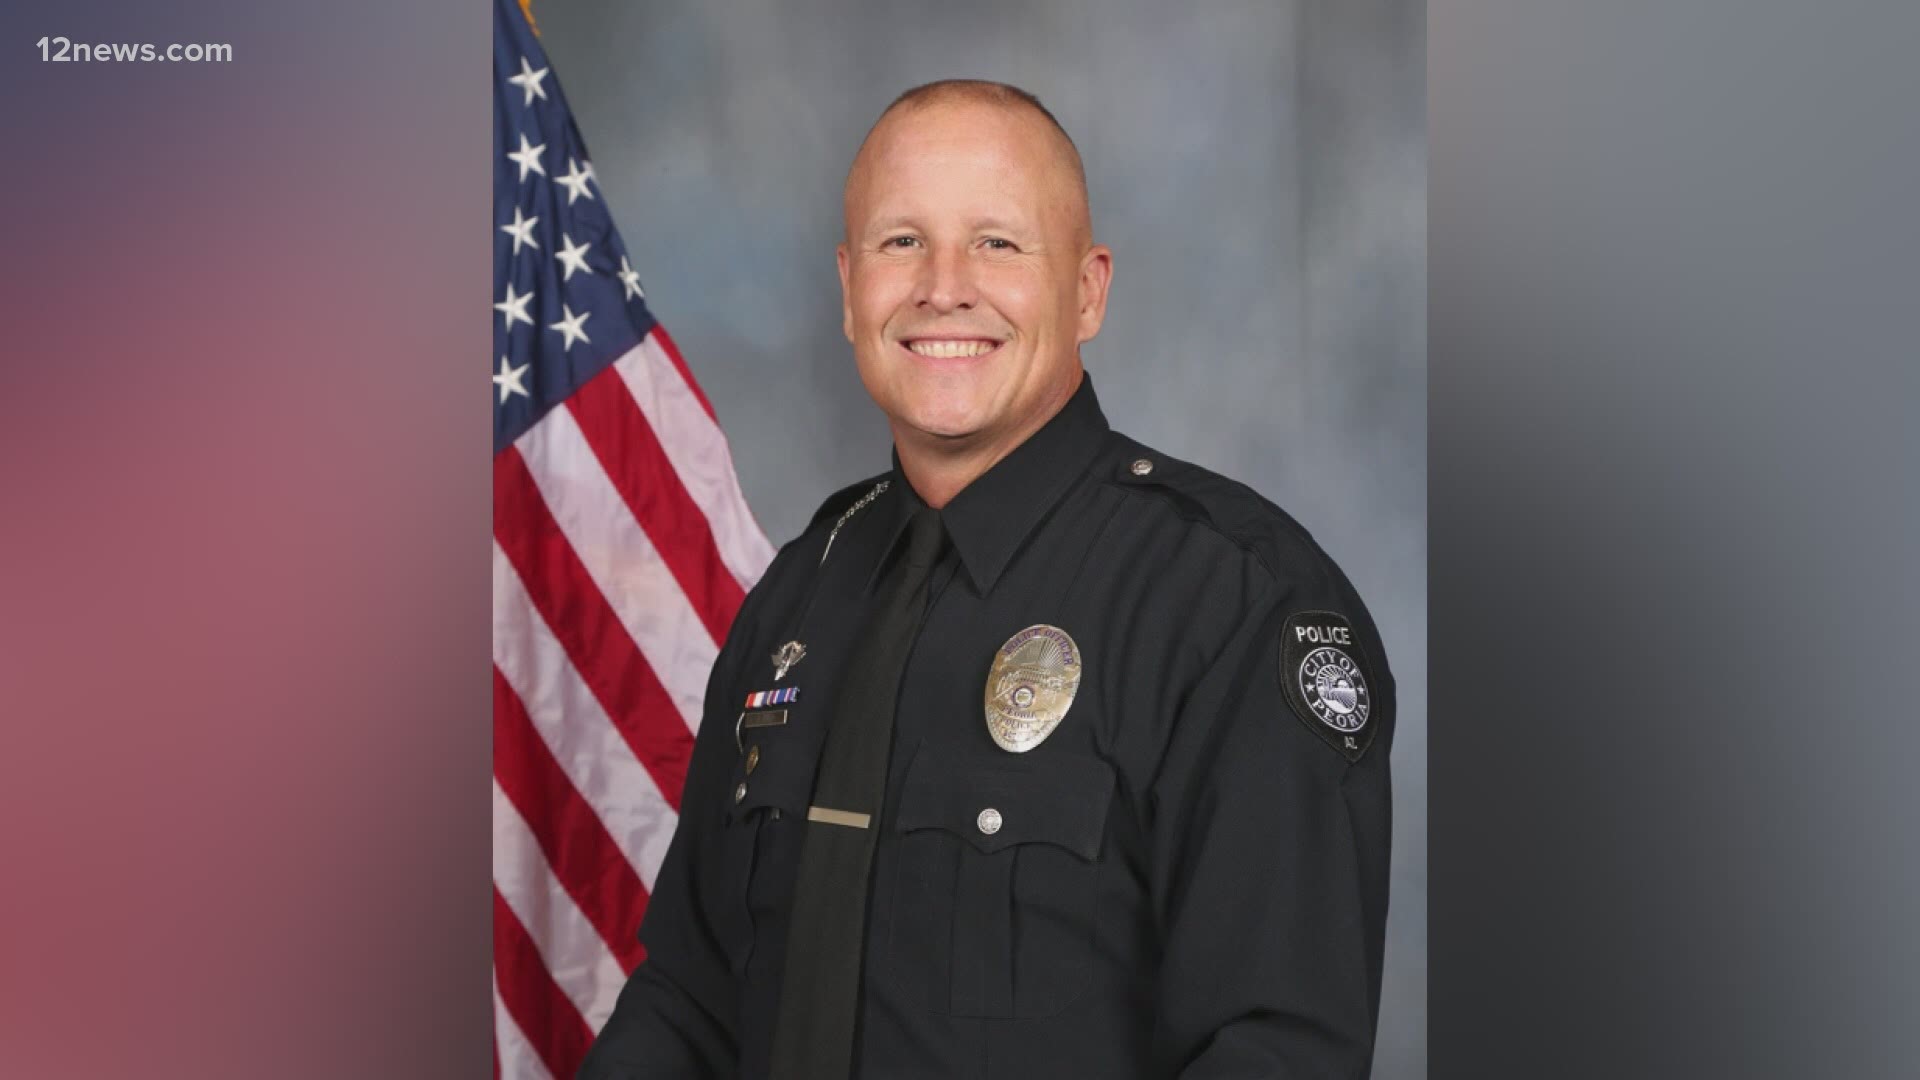 The Peoria police officer who died after a tragic motorcycle crash earlier this month was laid to rest Tuesday. Judd's funeral service was held in Peoria.